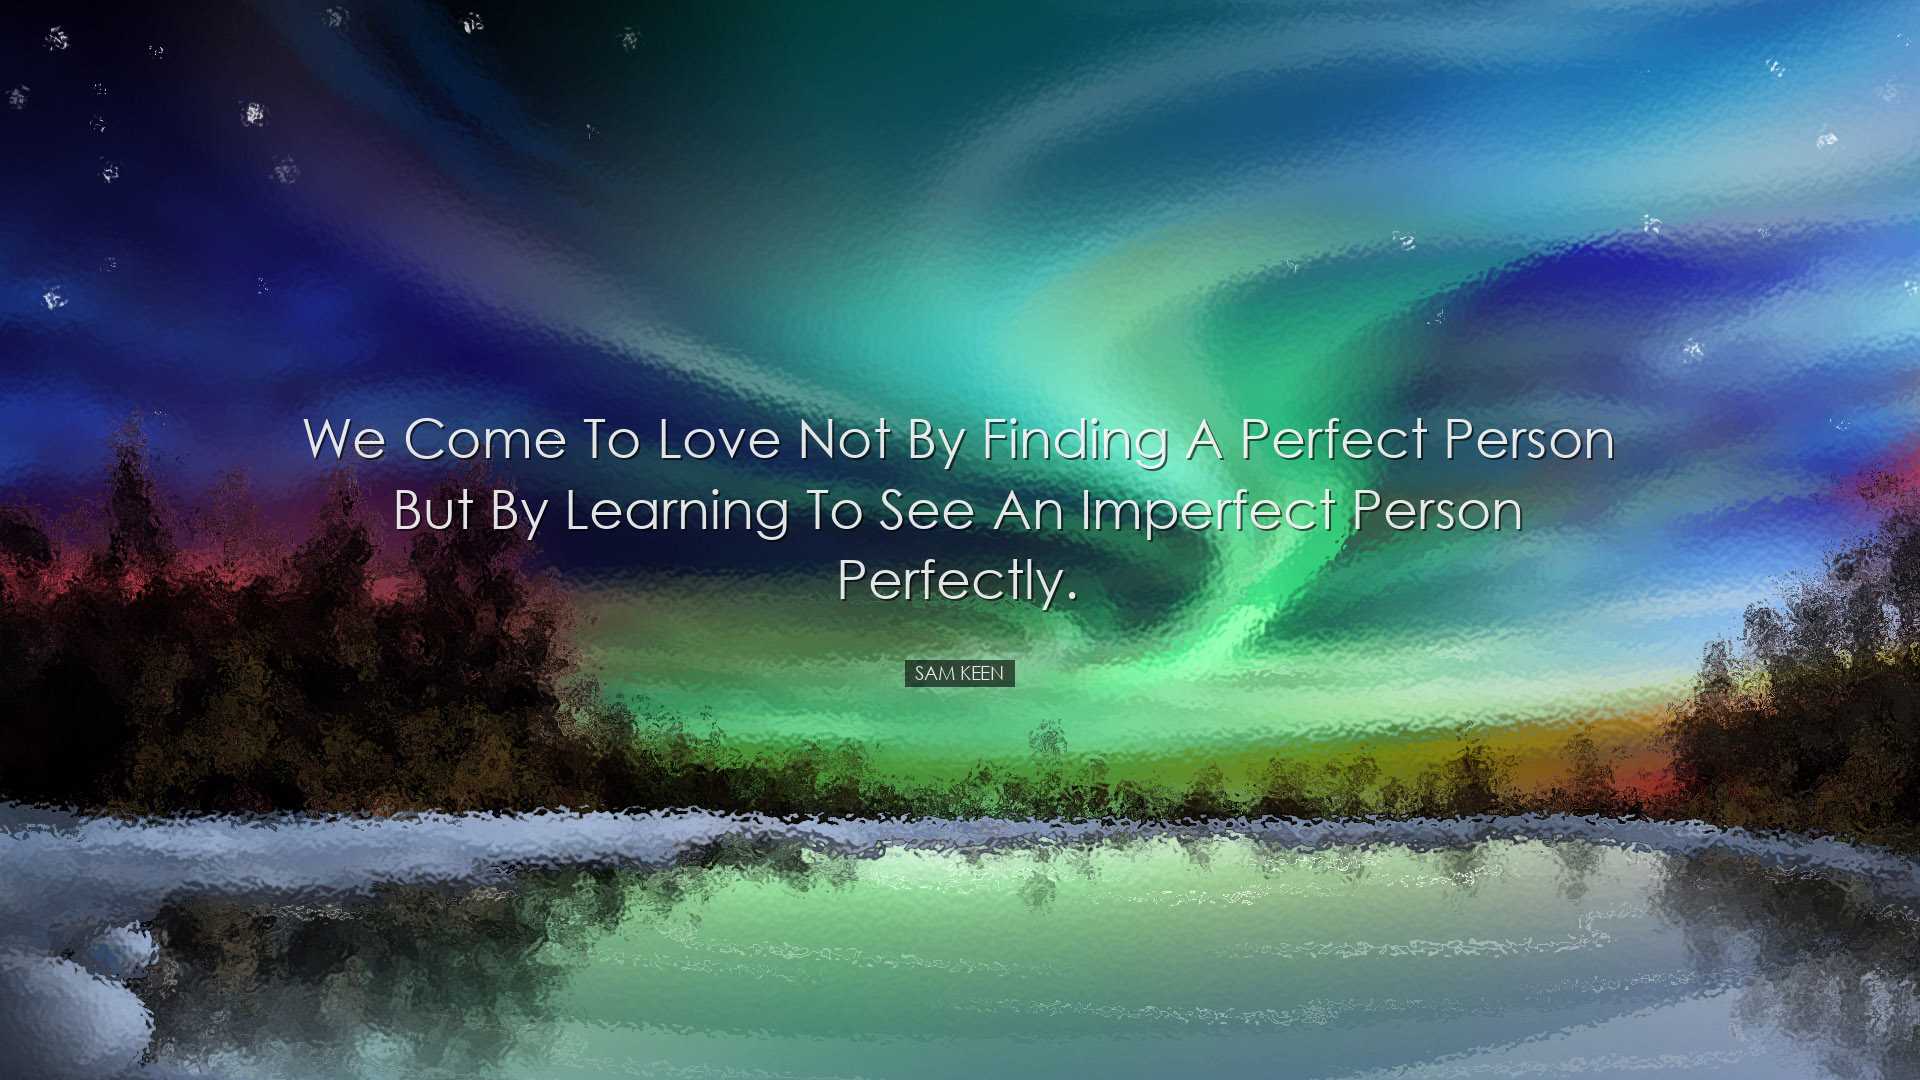 We come to love not by finding a perfect person but by learning to